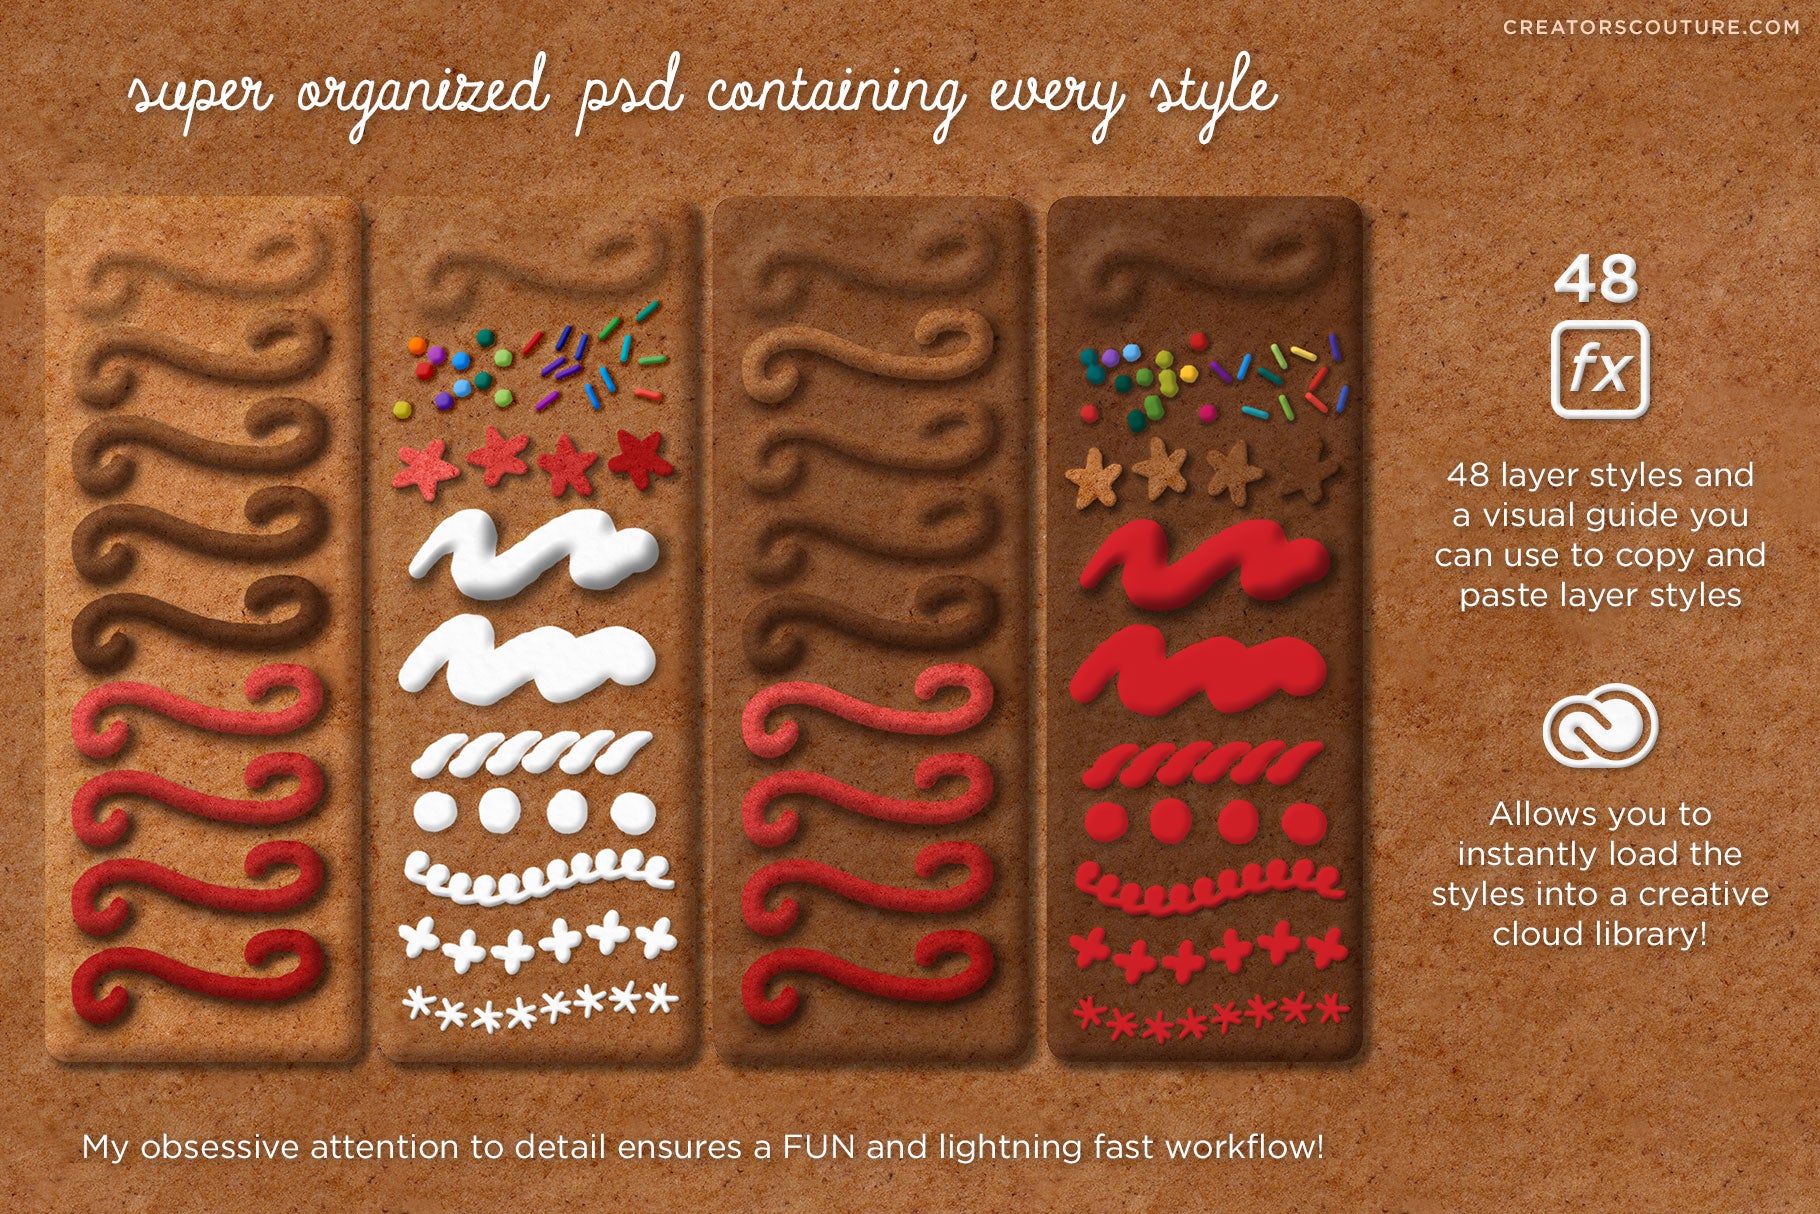 Gingerbread, Cookie, & Cake Graphic & Lettering Effects for Photoshop, layer styles smart psd